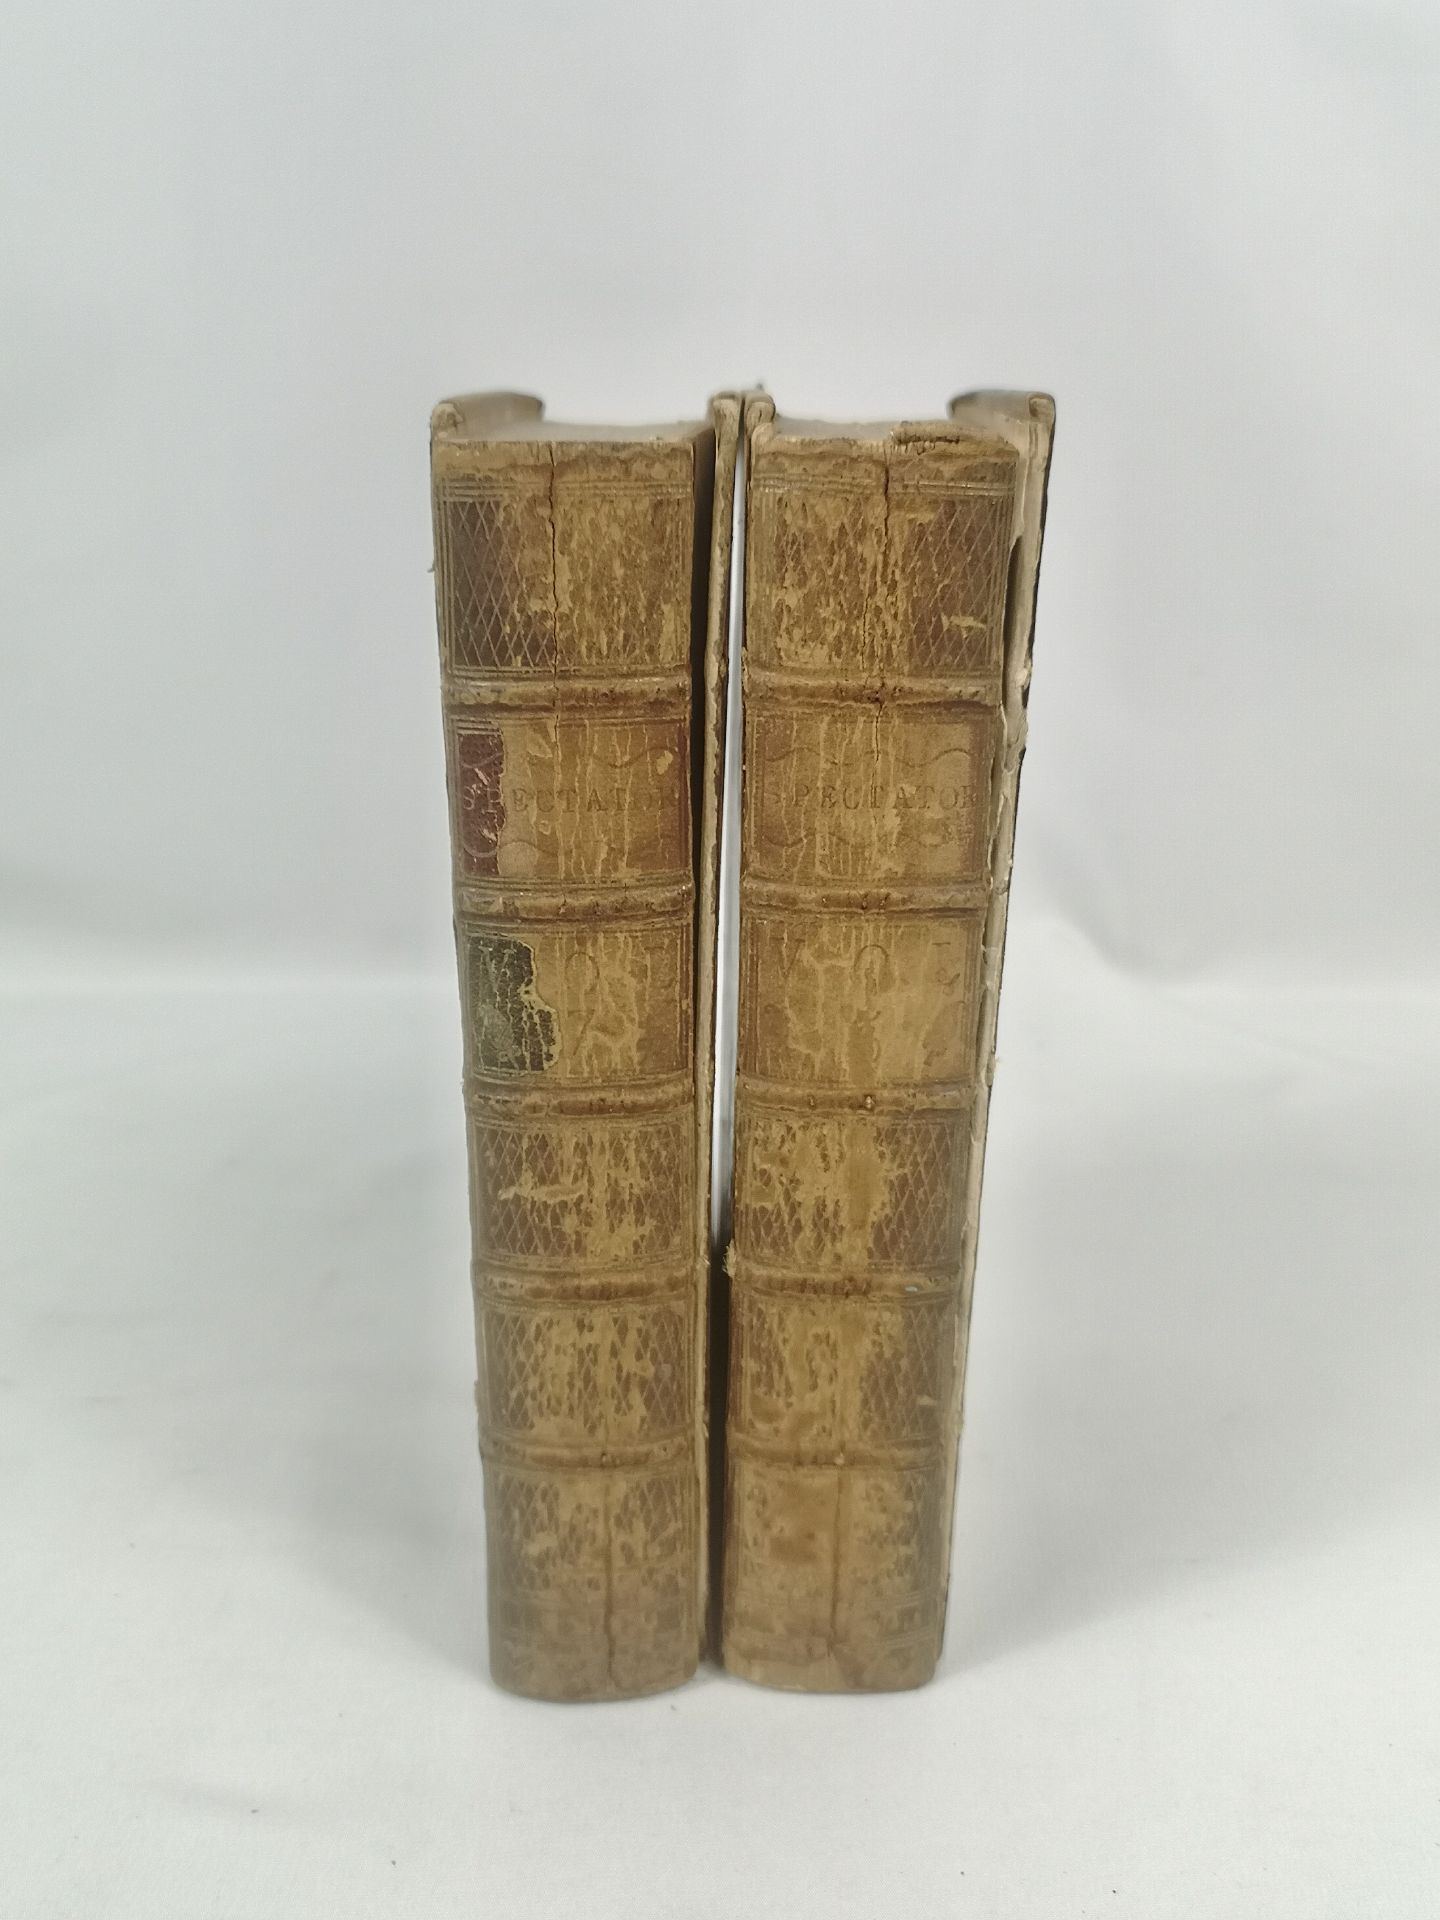 The Spectator, 2 volumes. Published London 1766